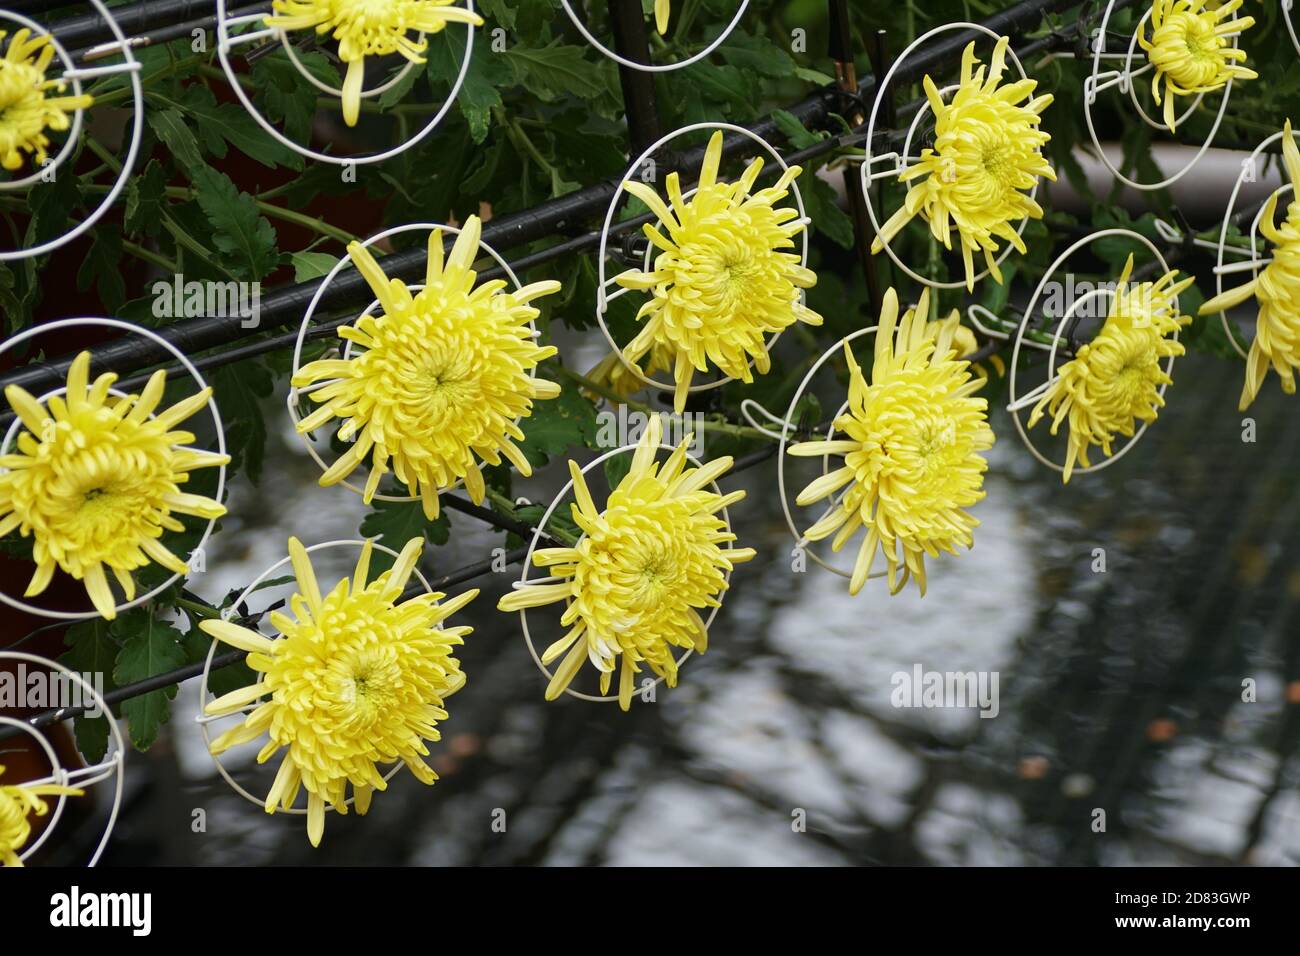 Yellow spider mum flowers arranged inside the metal rings Stock Photo